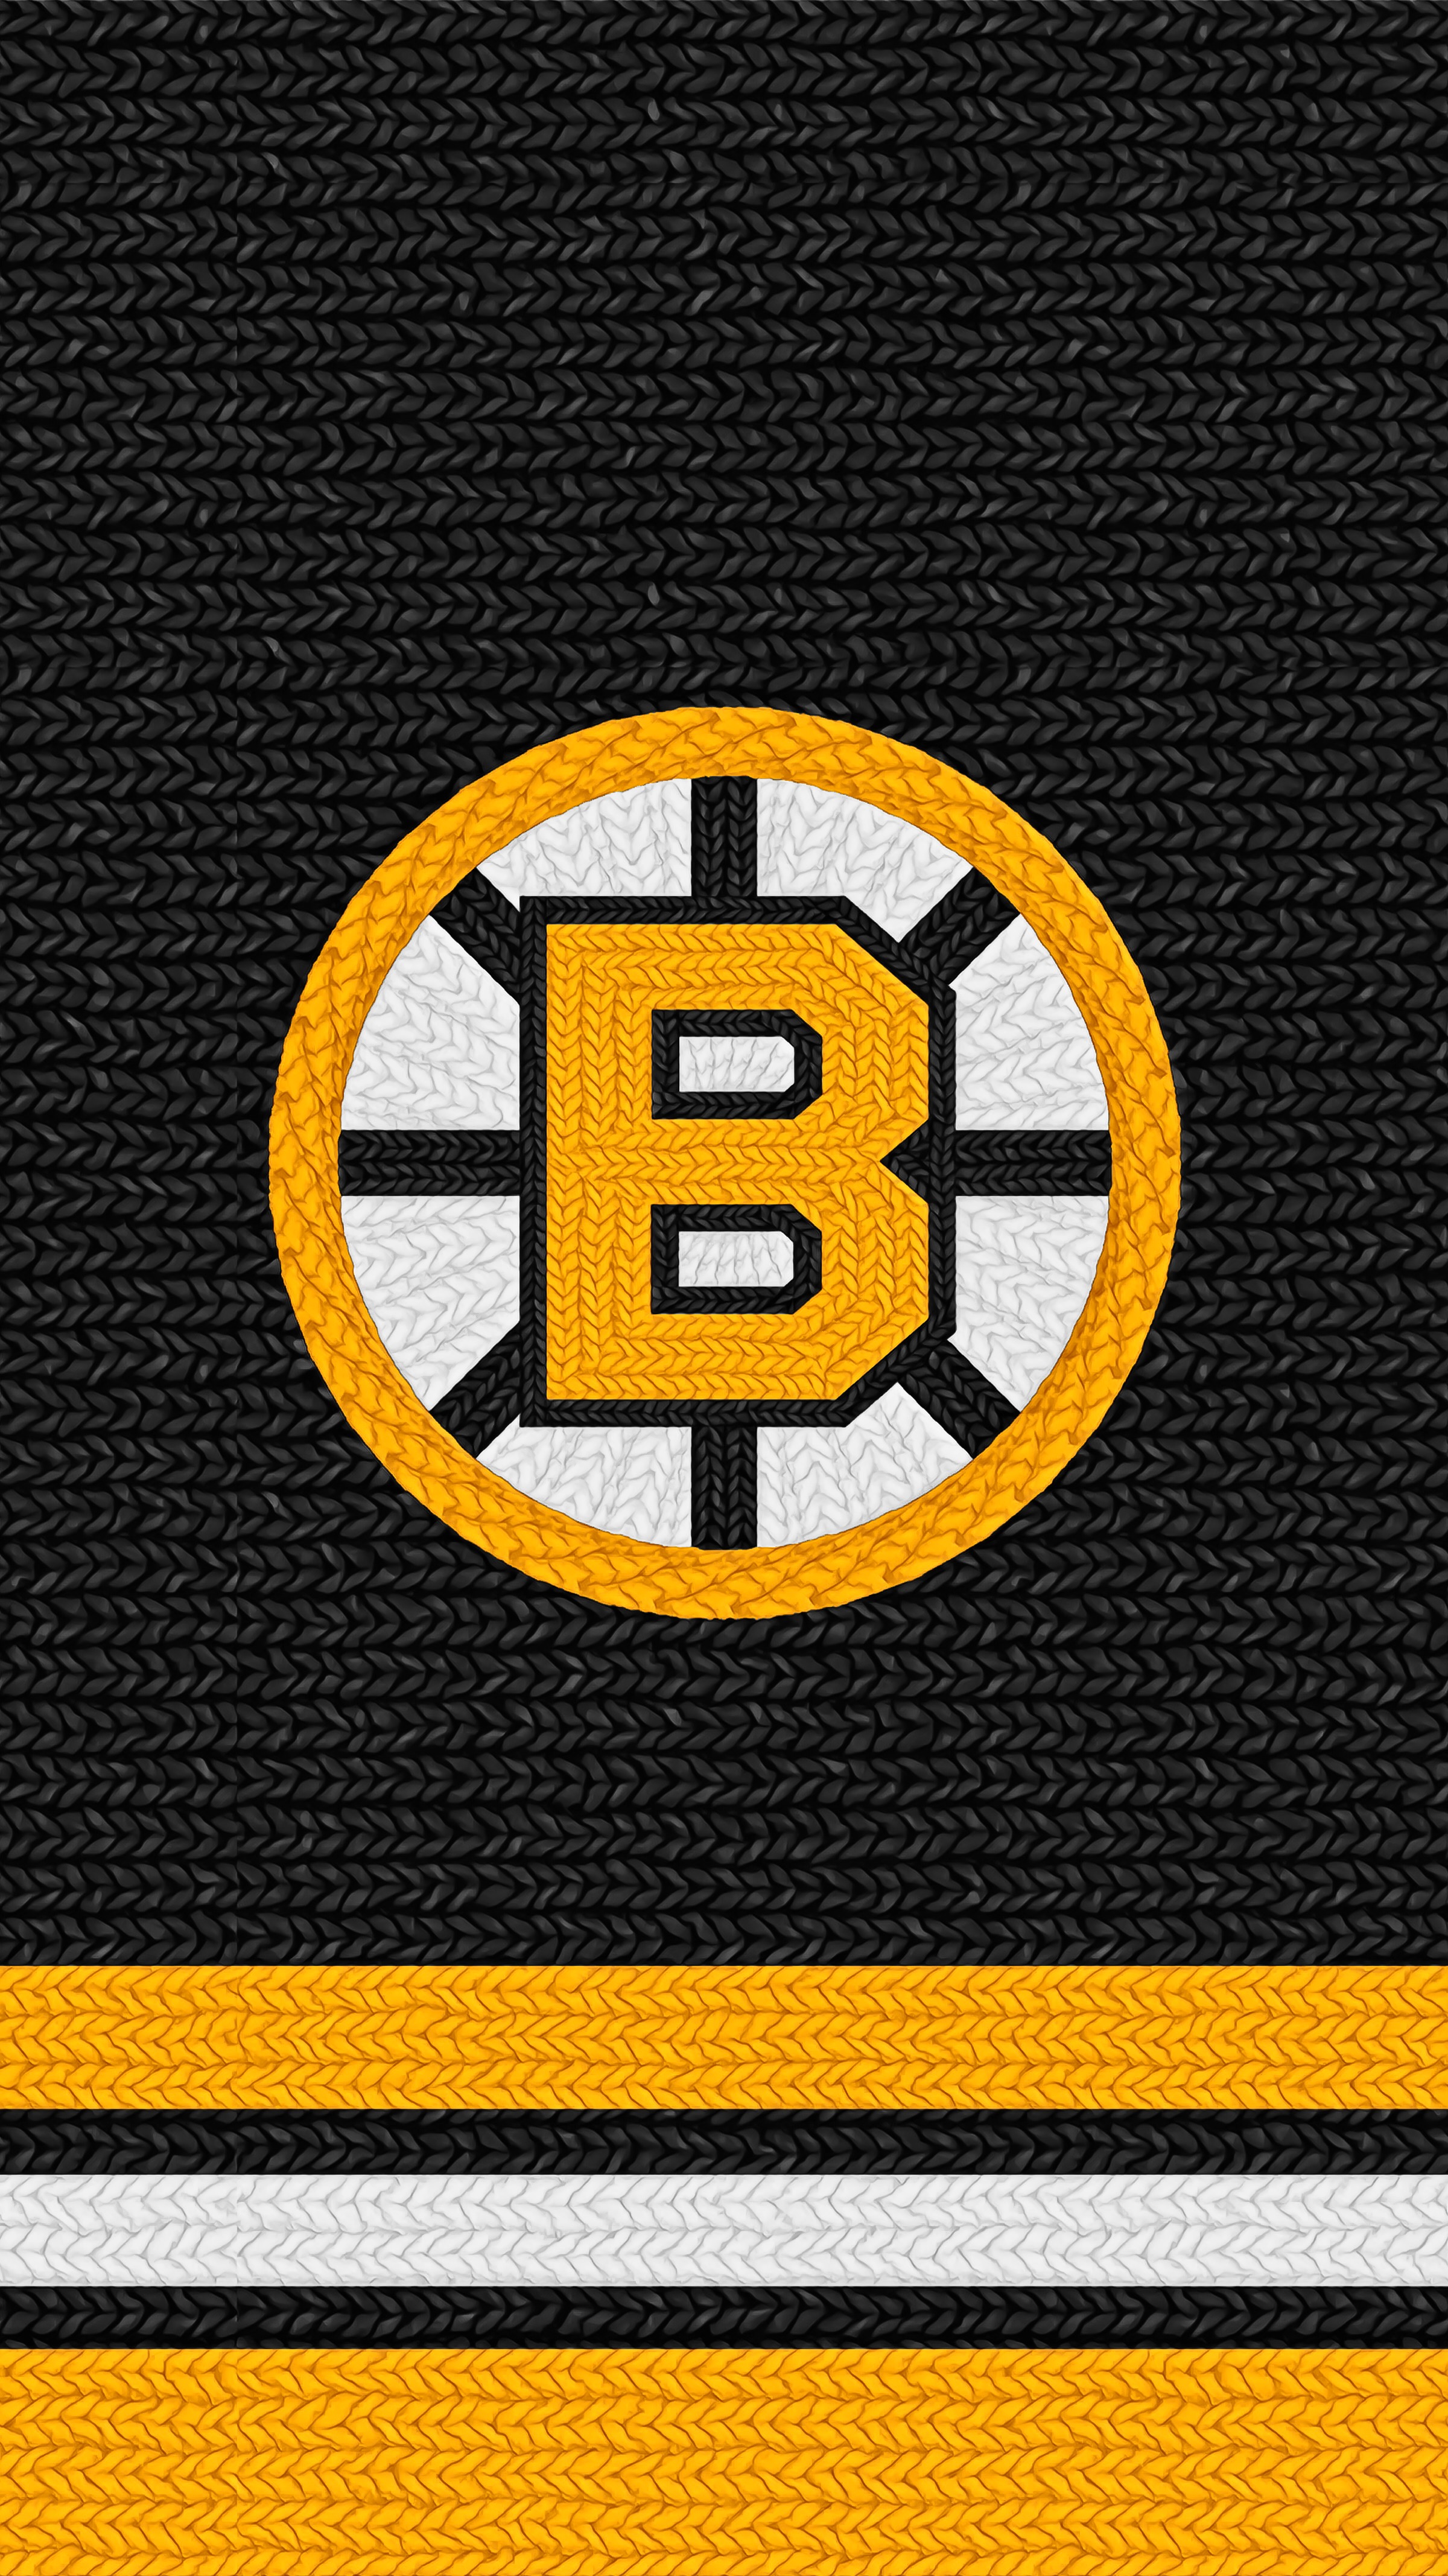 I made some Bruins mobile wallpapers, check my comment for a black